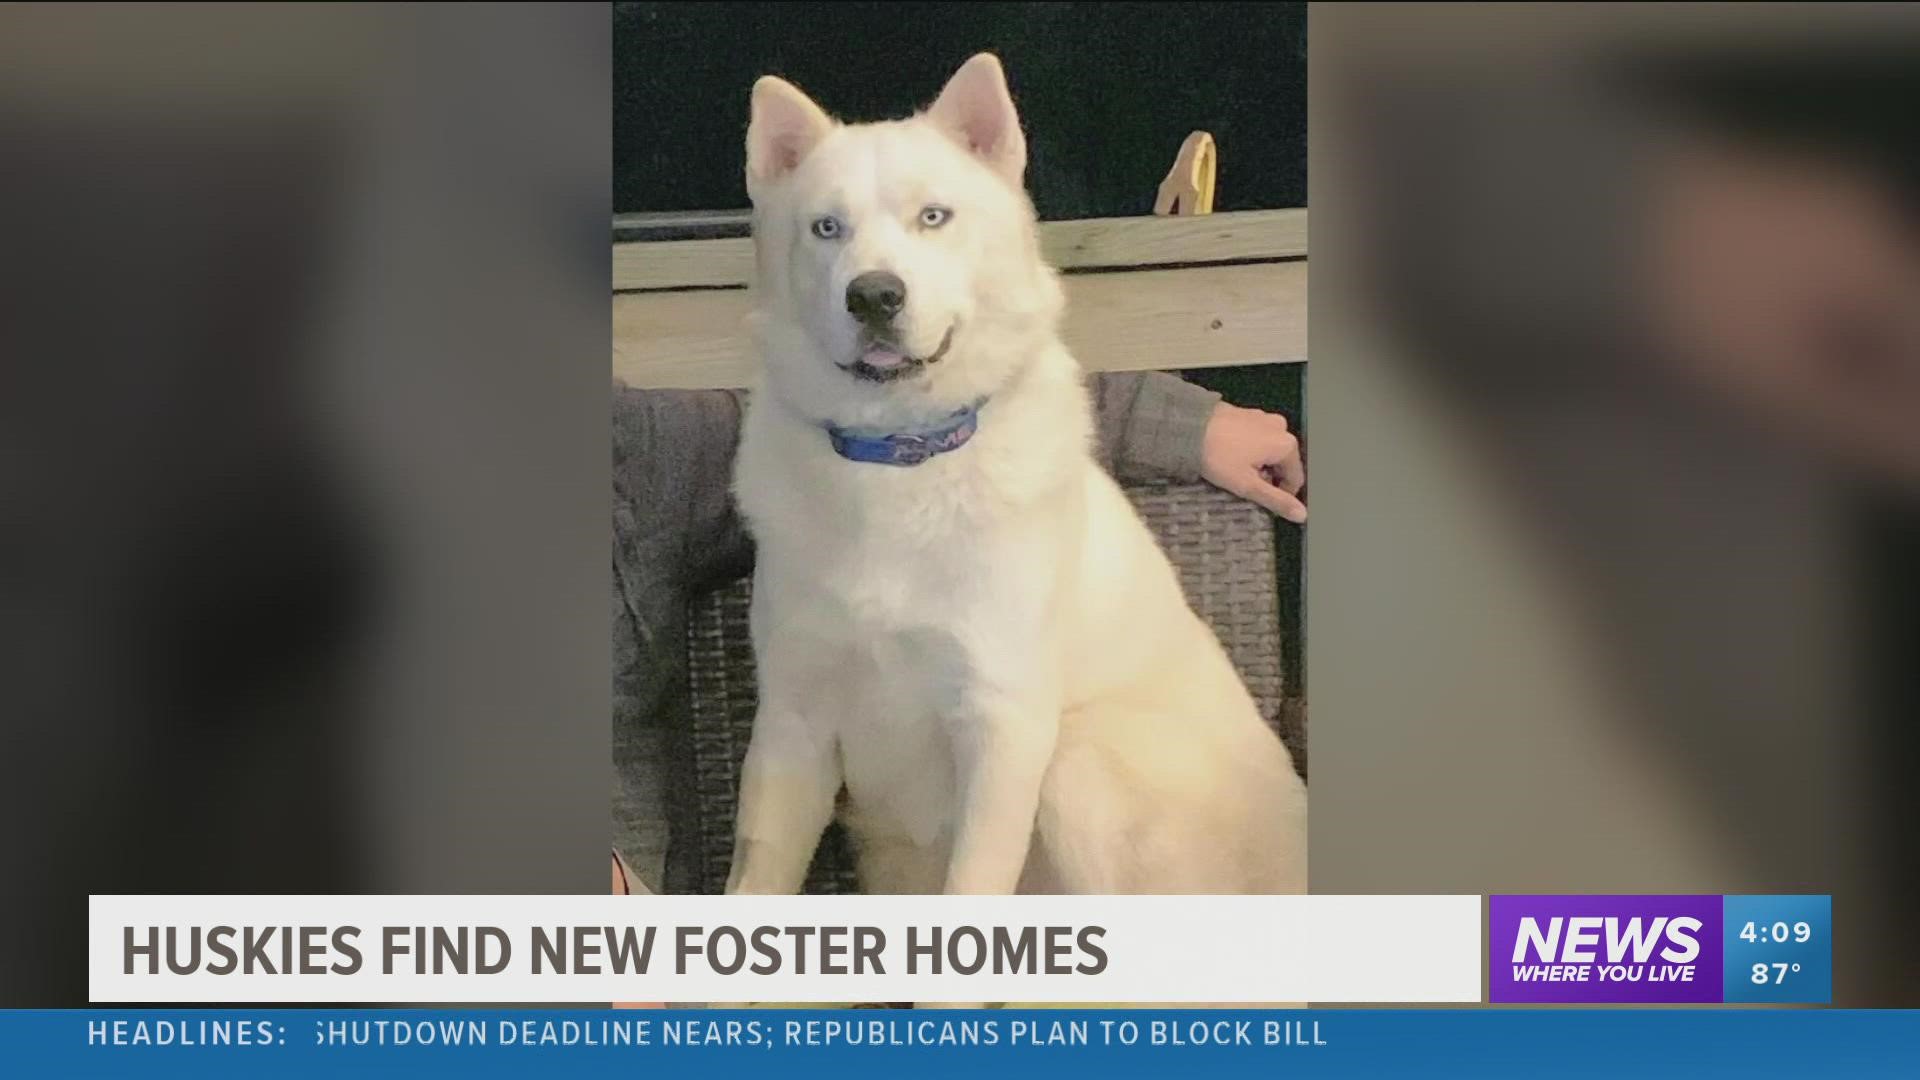 The huskies were taken from the owner, who was arrested for animal cruelty, and taken to new foster homes to recover.